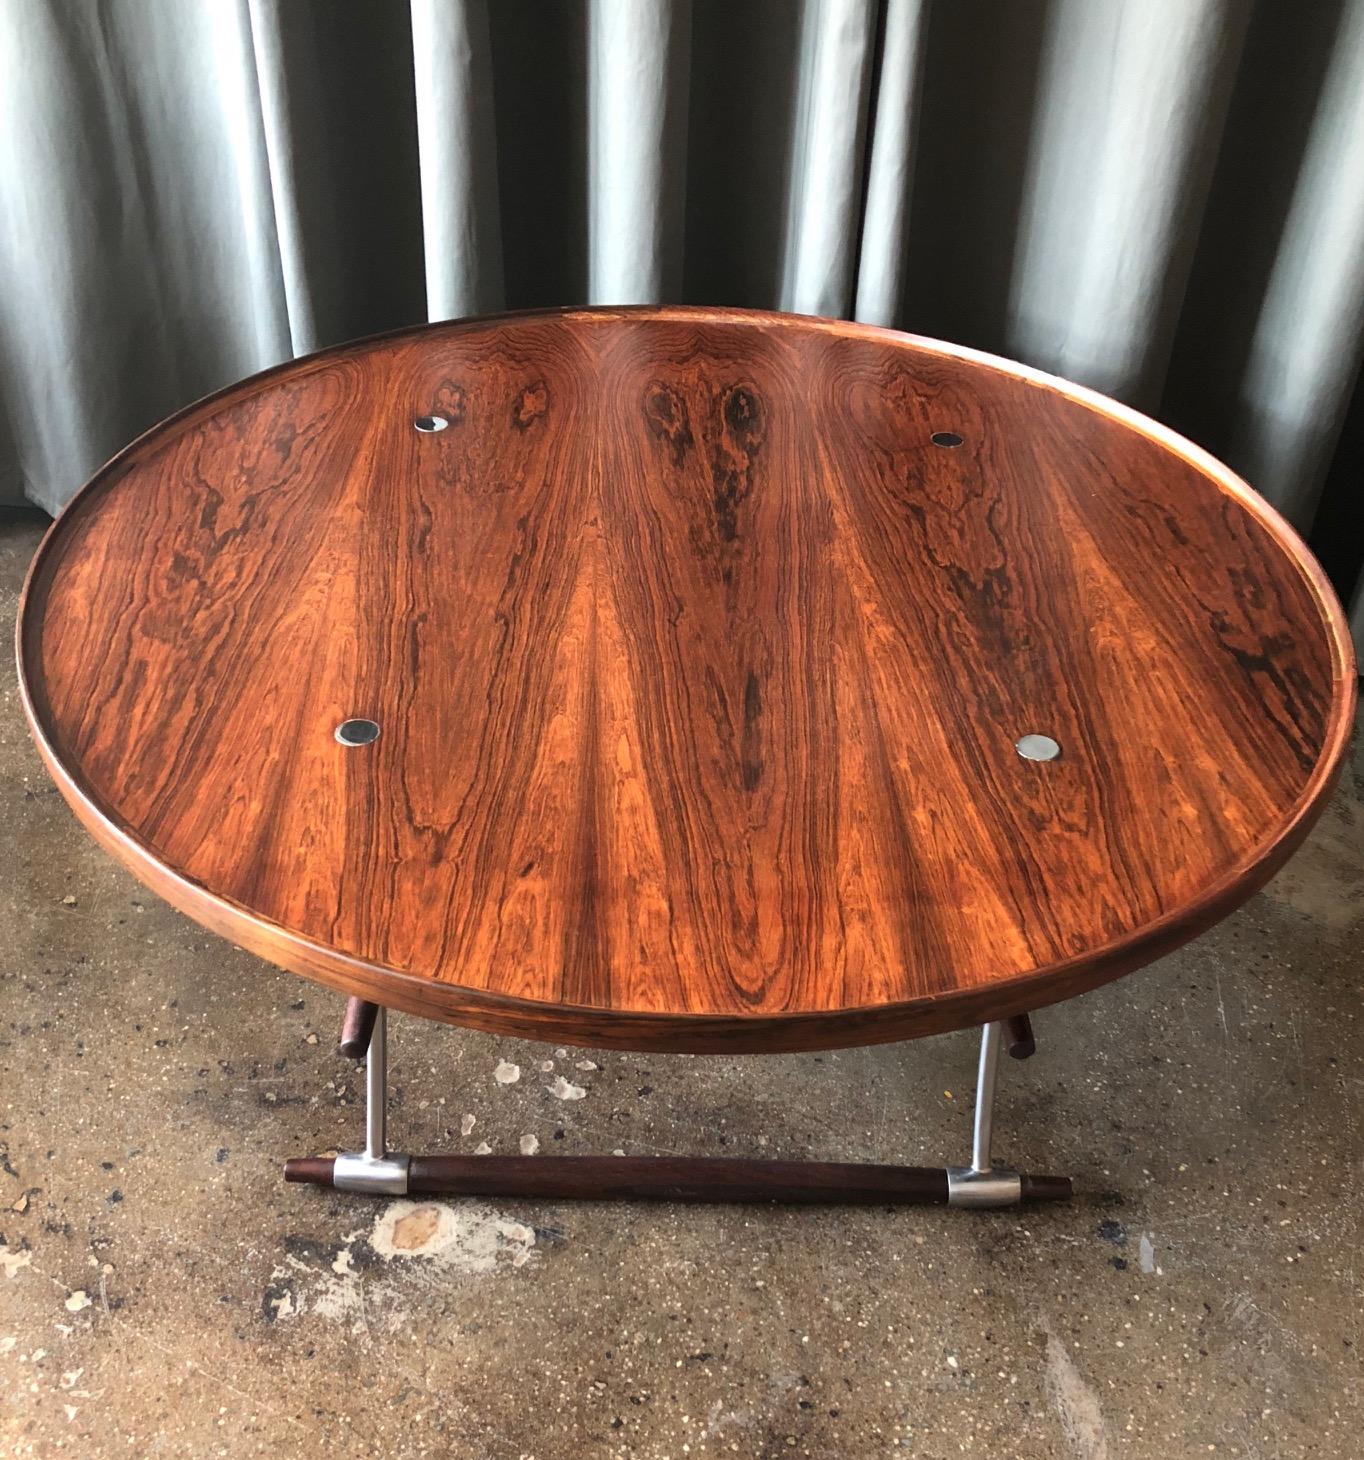 Stokke coffee table designed by Jens Quistgaard for Nissen, Denmark, circa 1960. Rosewood and polished metal. Excellent vintage condition.
 